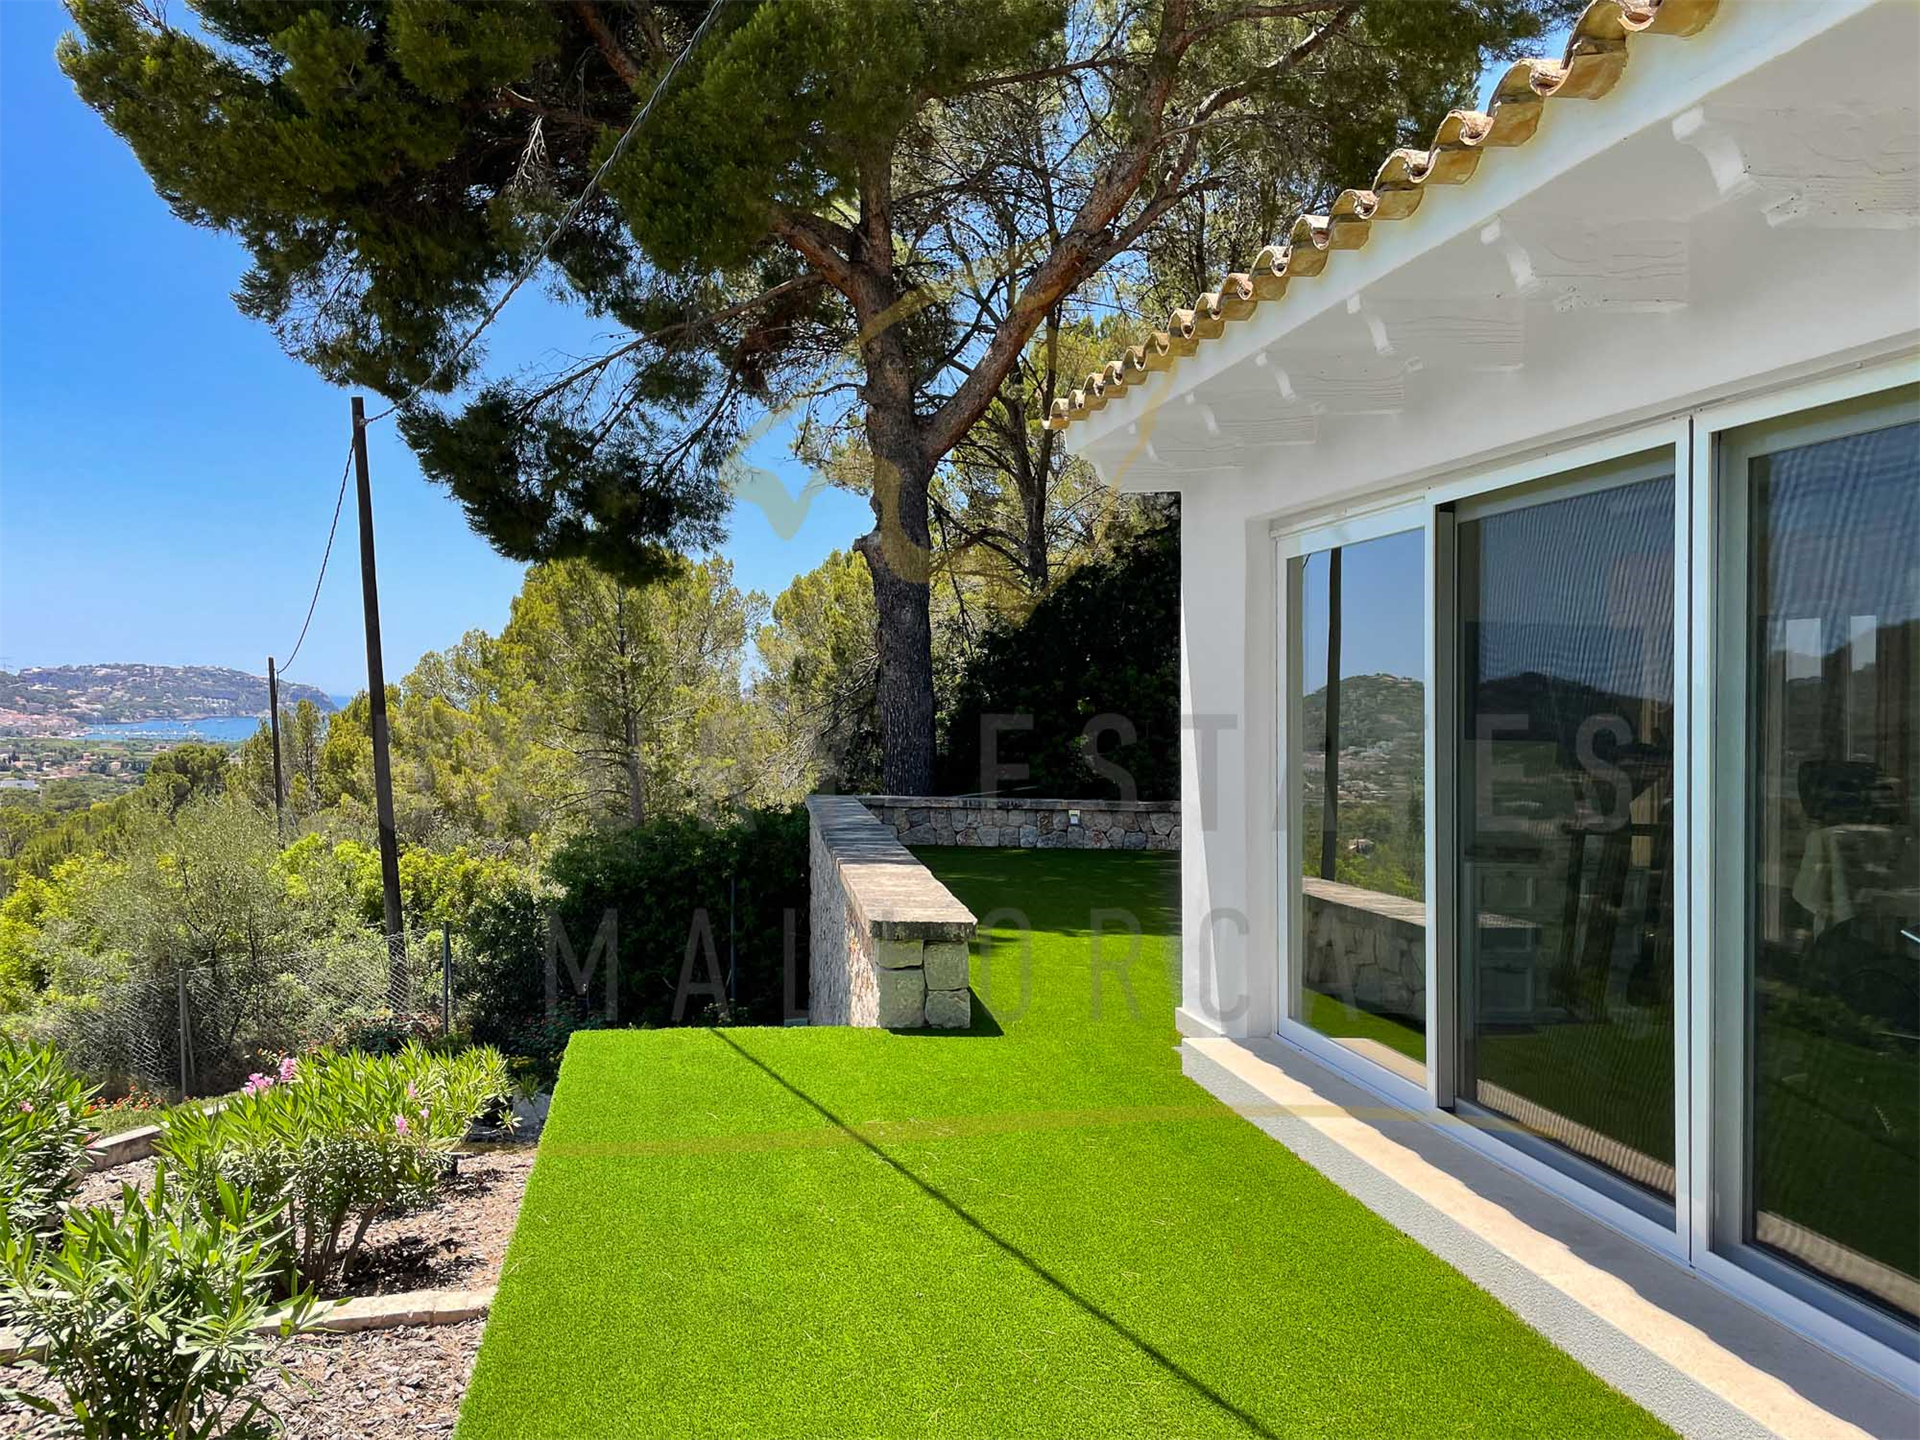 33. Estate for Sale at Modern Mediterranean Finca with sea views and guest houses in Port Andratx on Mallorca Port Andratx, Mallorca,07157 Spain